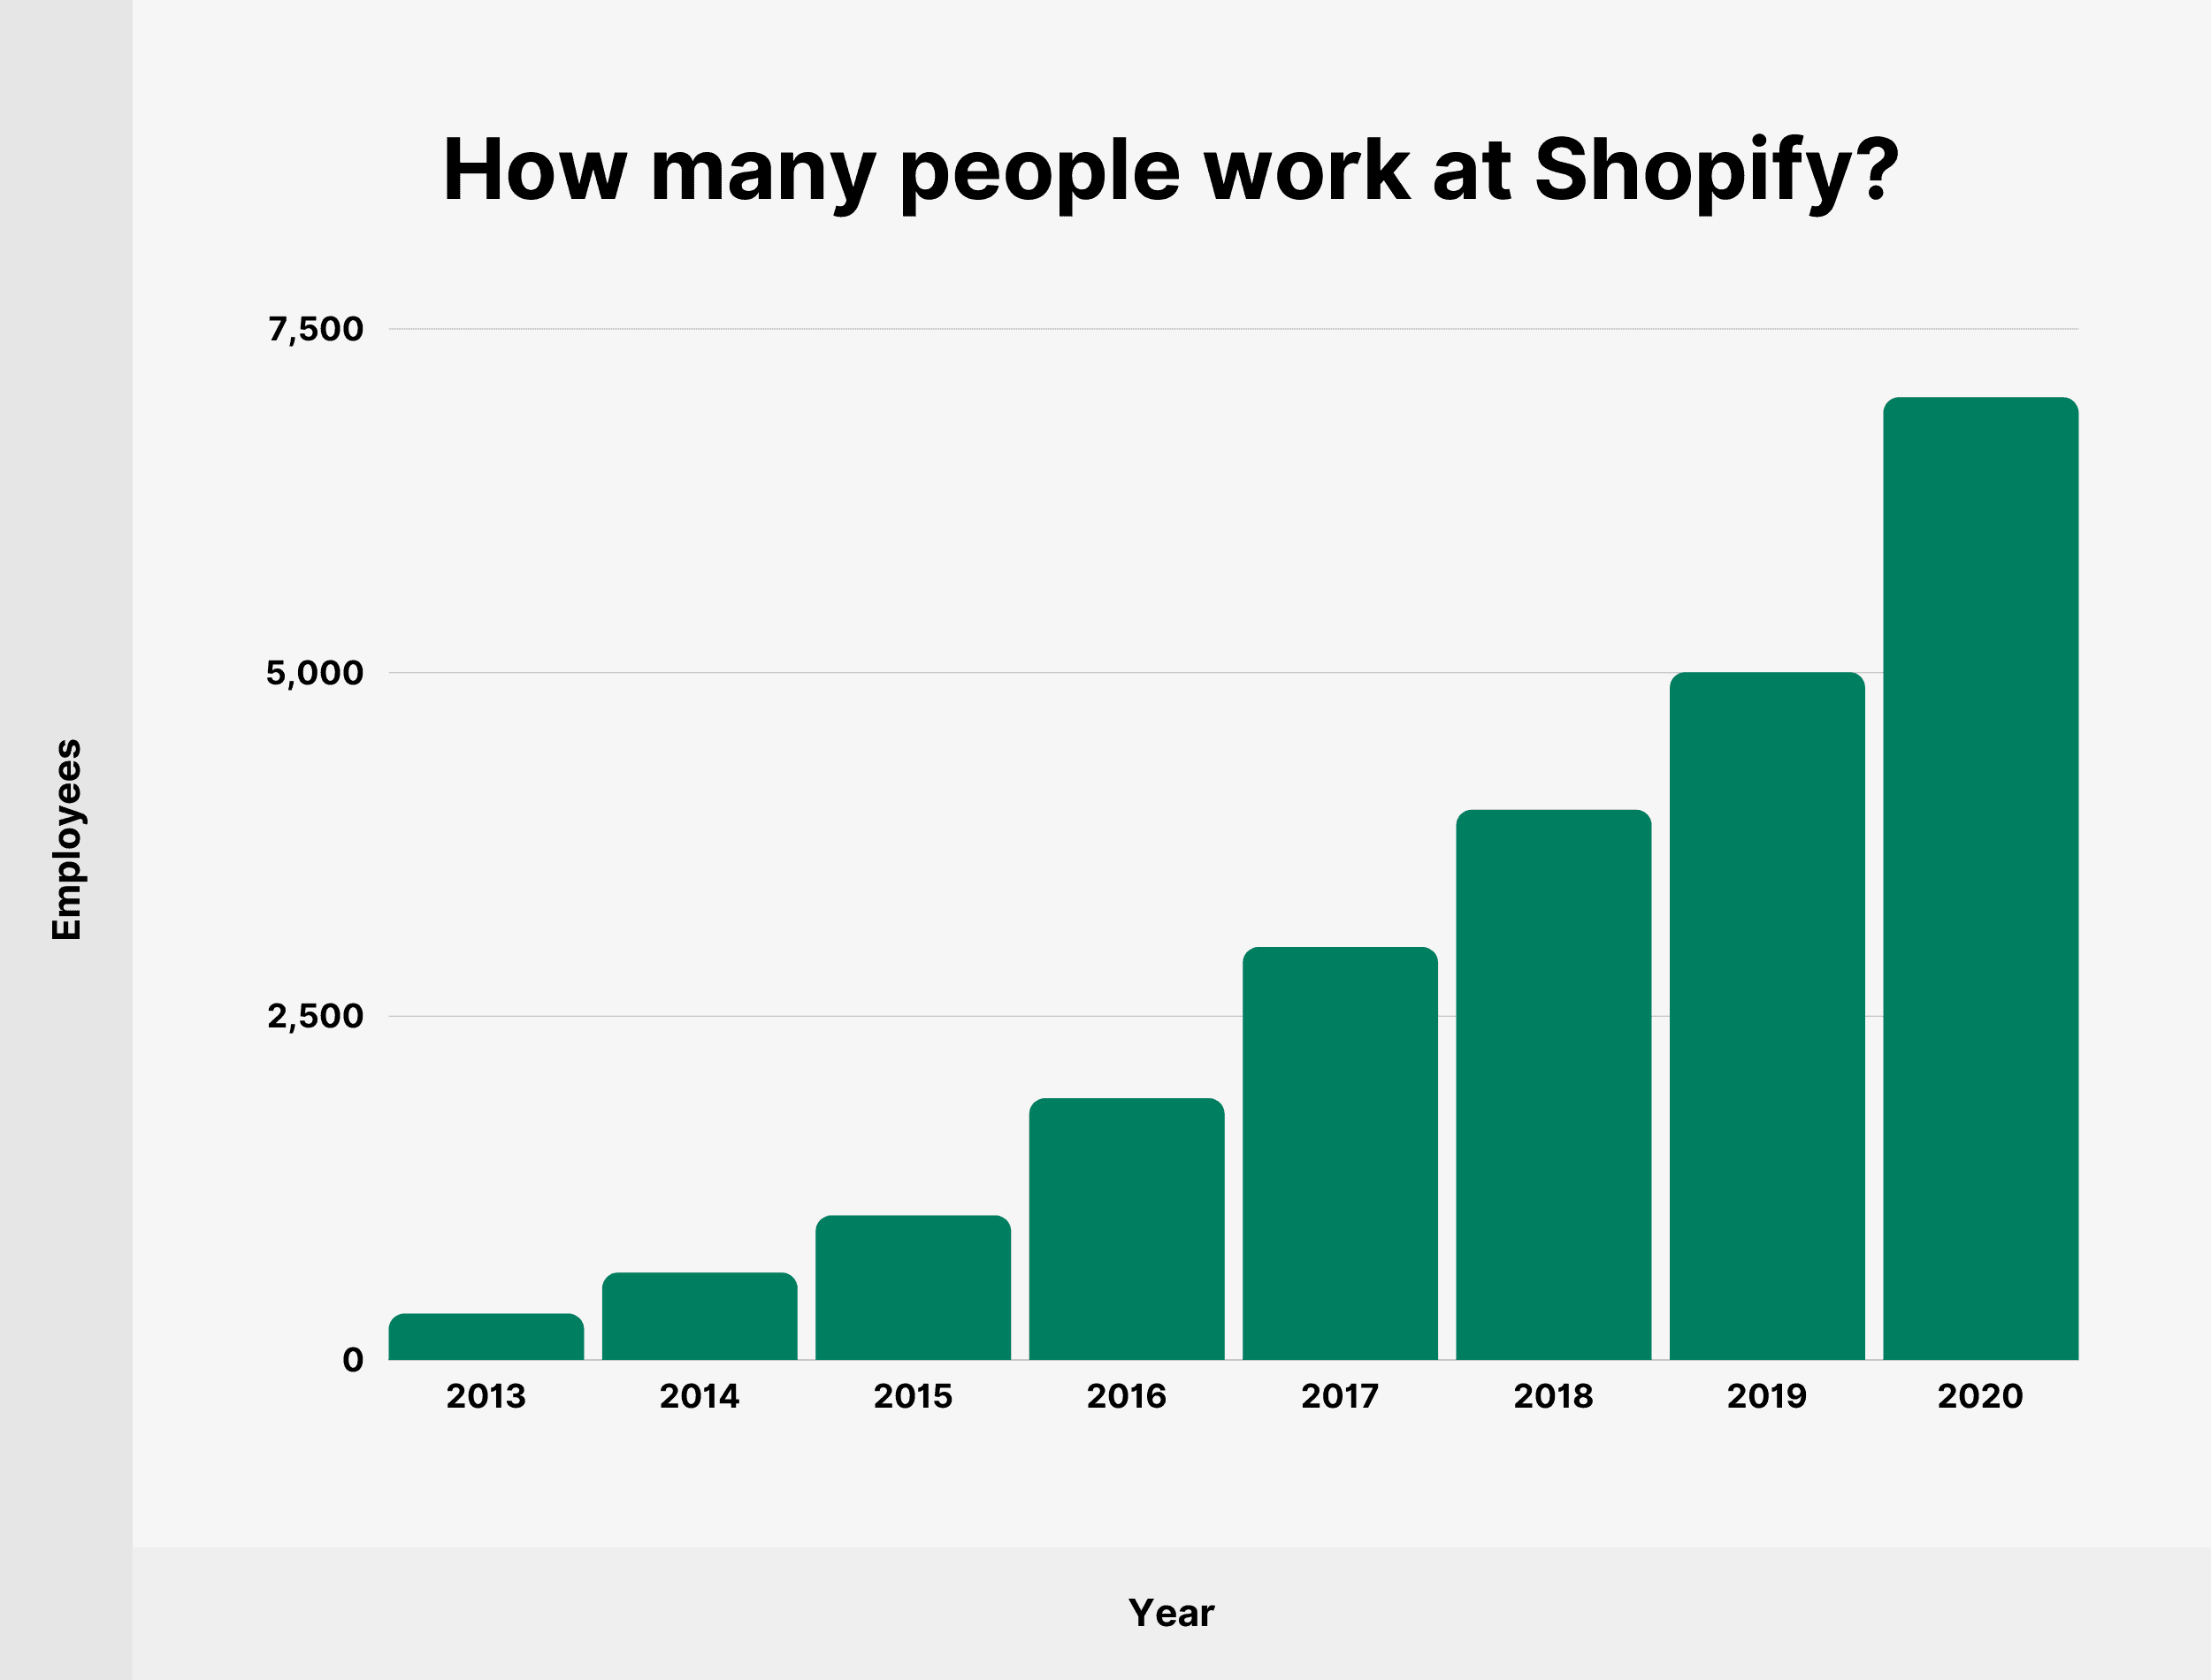 How many people work at Shopify?